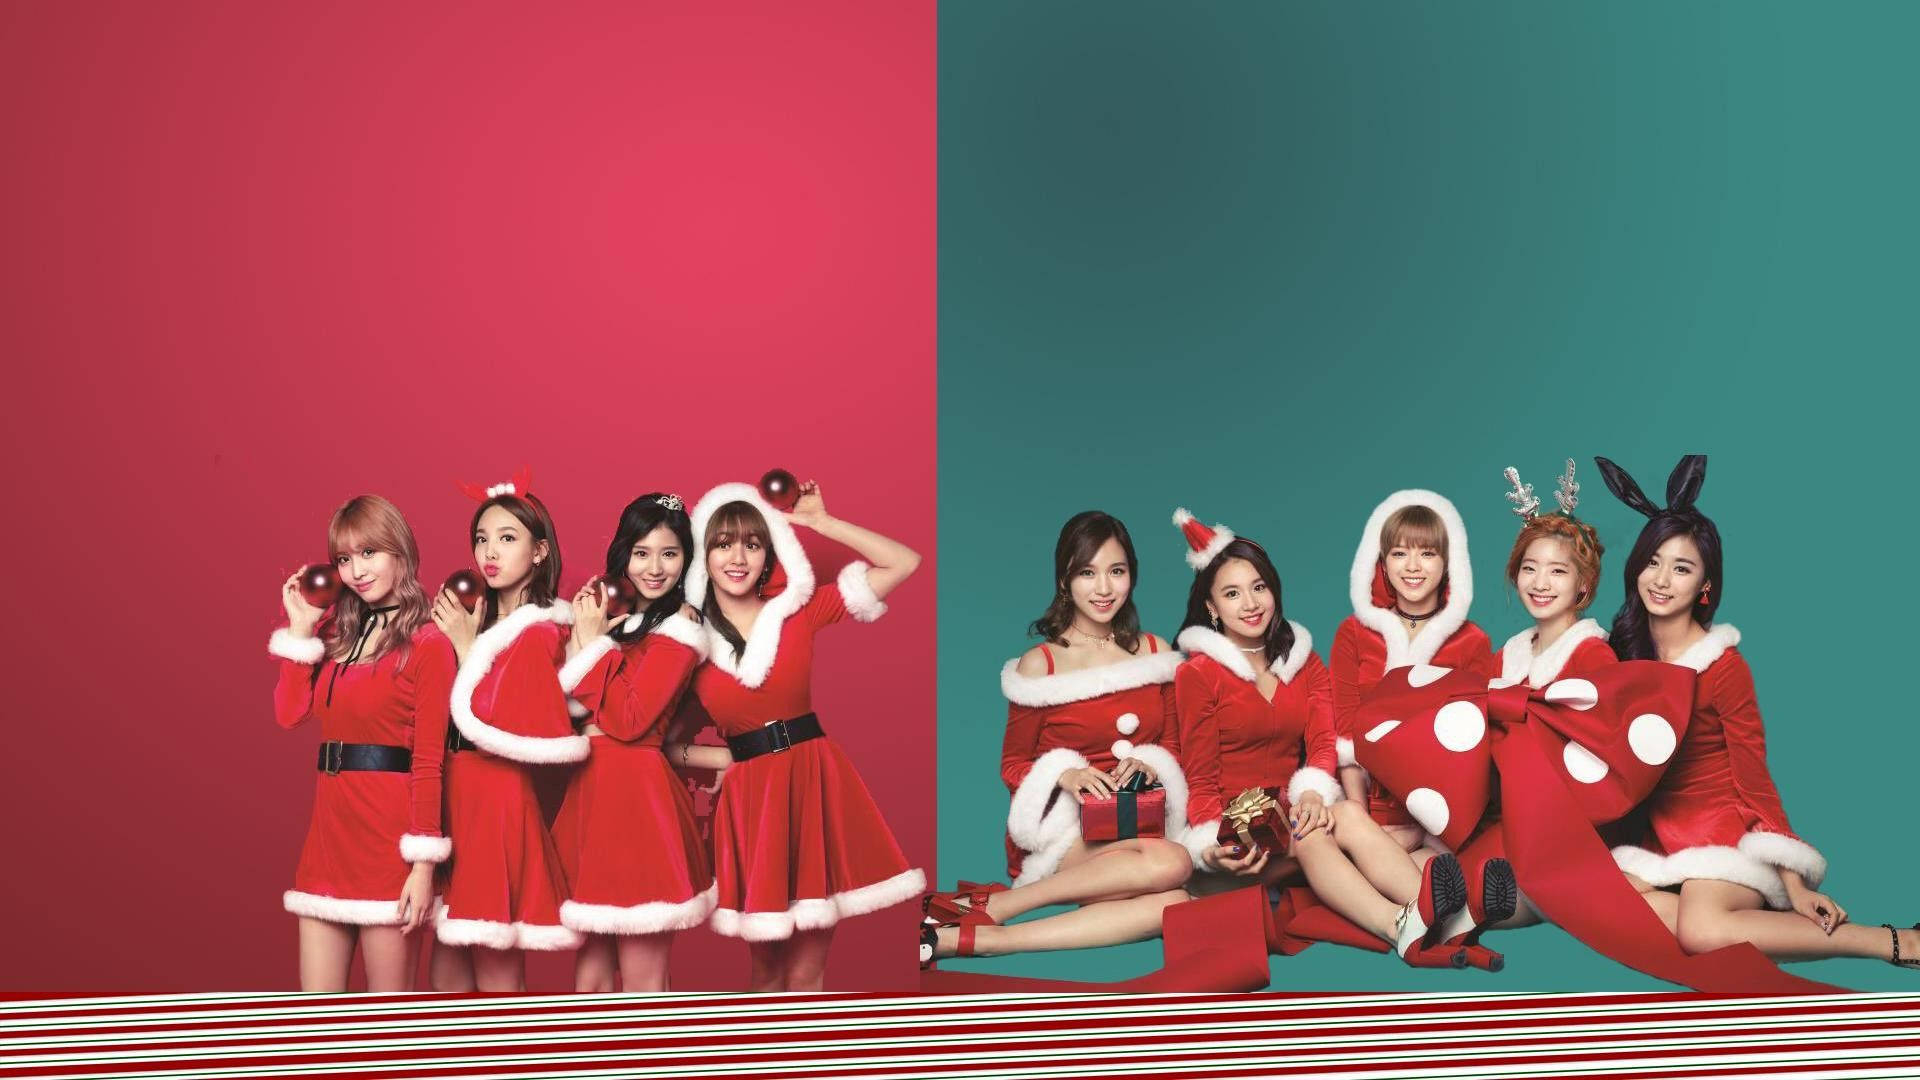 1920x1080 Download Twice Santa Claus Outfit Wallpaper